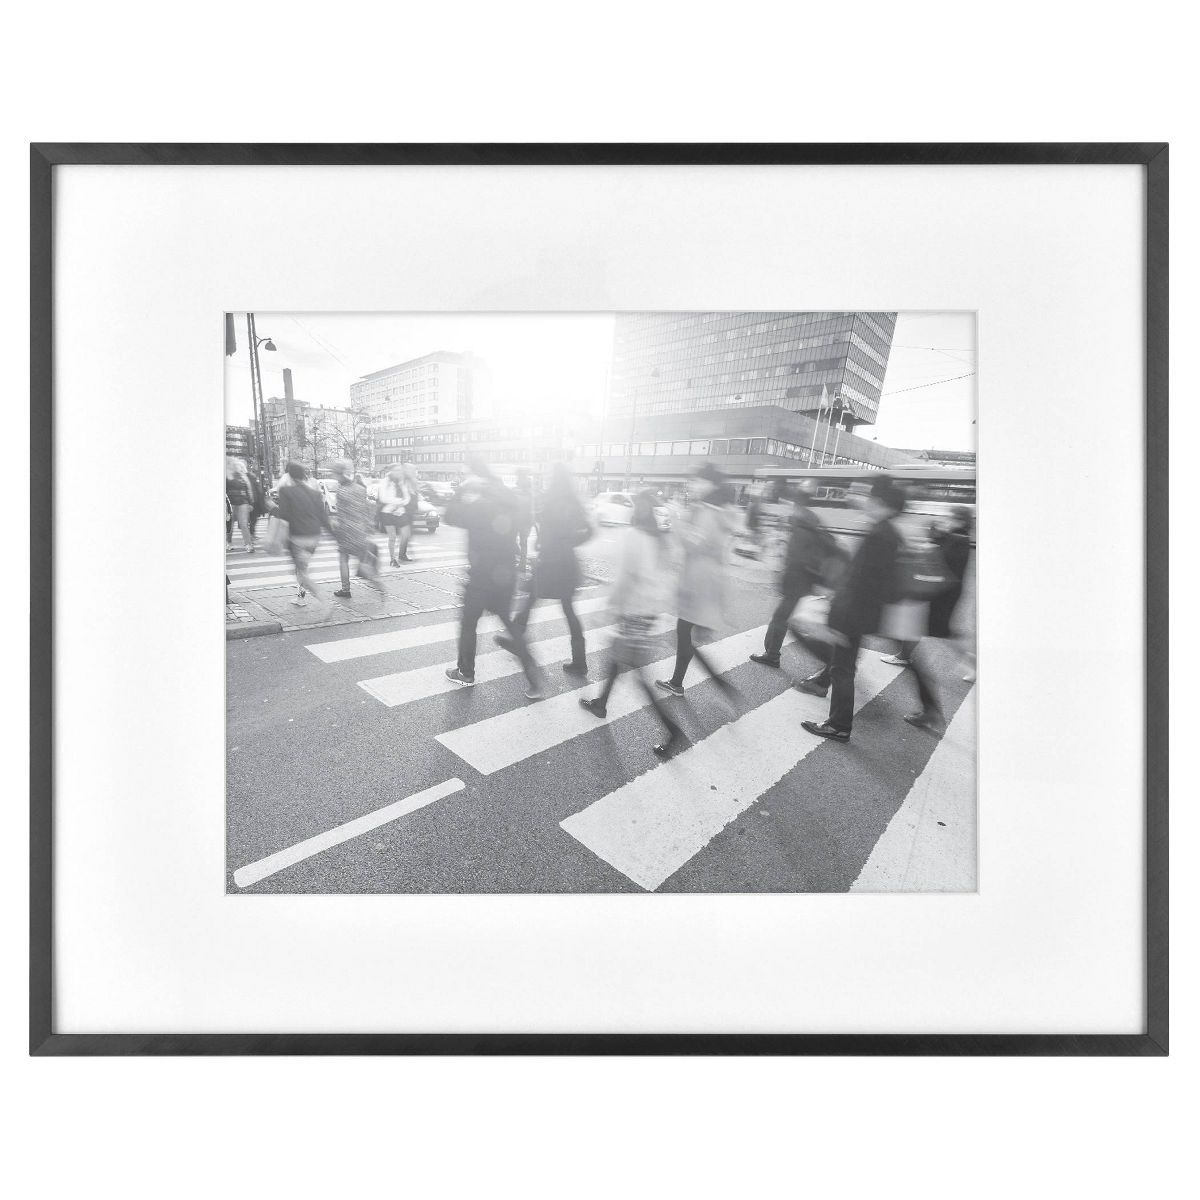 14.4" x 18.4" Matted to 8" x 10" Thin Gallery Frame Black - Threshold™ | Target